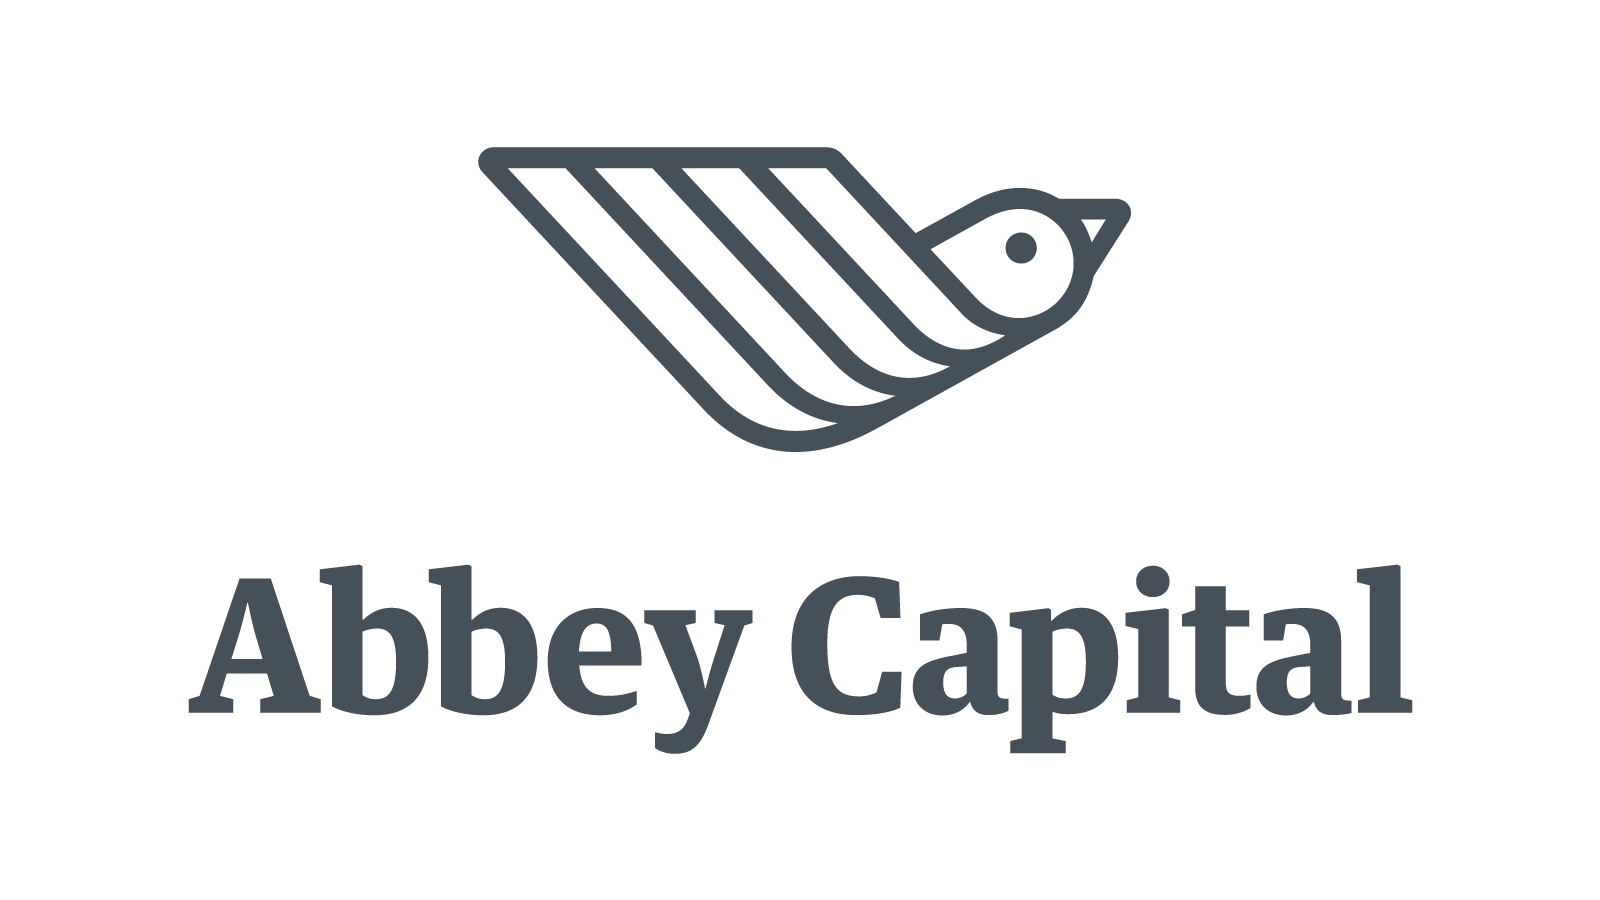 Abbey Capital Alternative Investment Manager